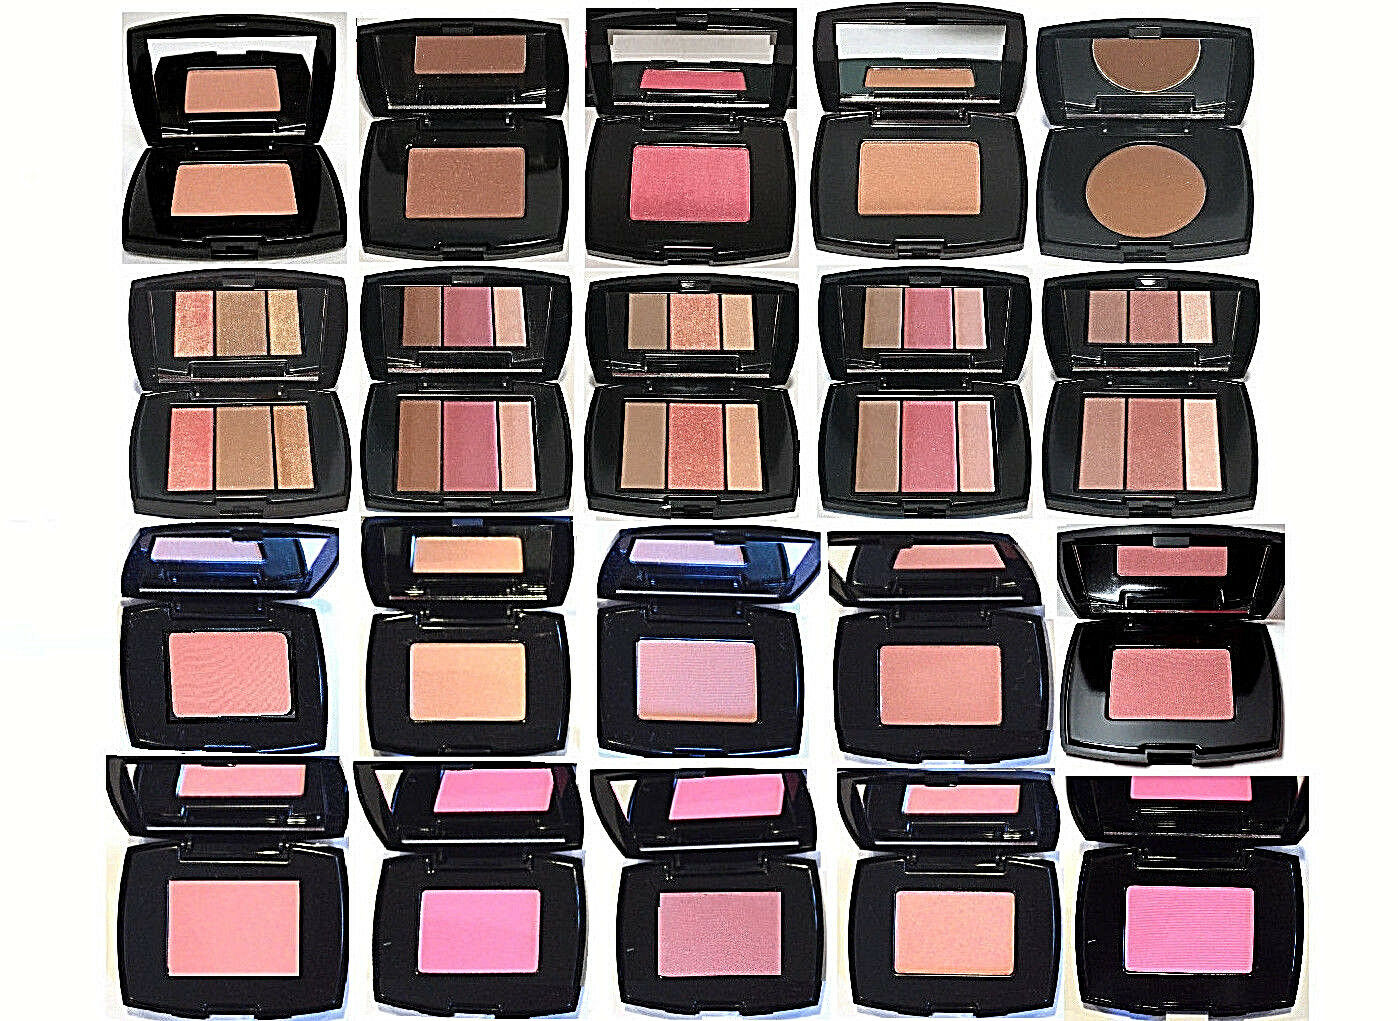 Lancome Blush Subtil Delicate Oil Free Powder Or All-in-one Palette Cont Hilight